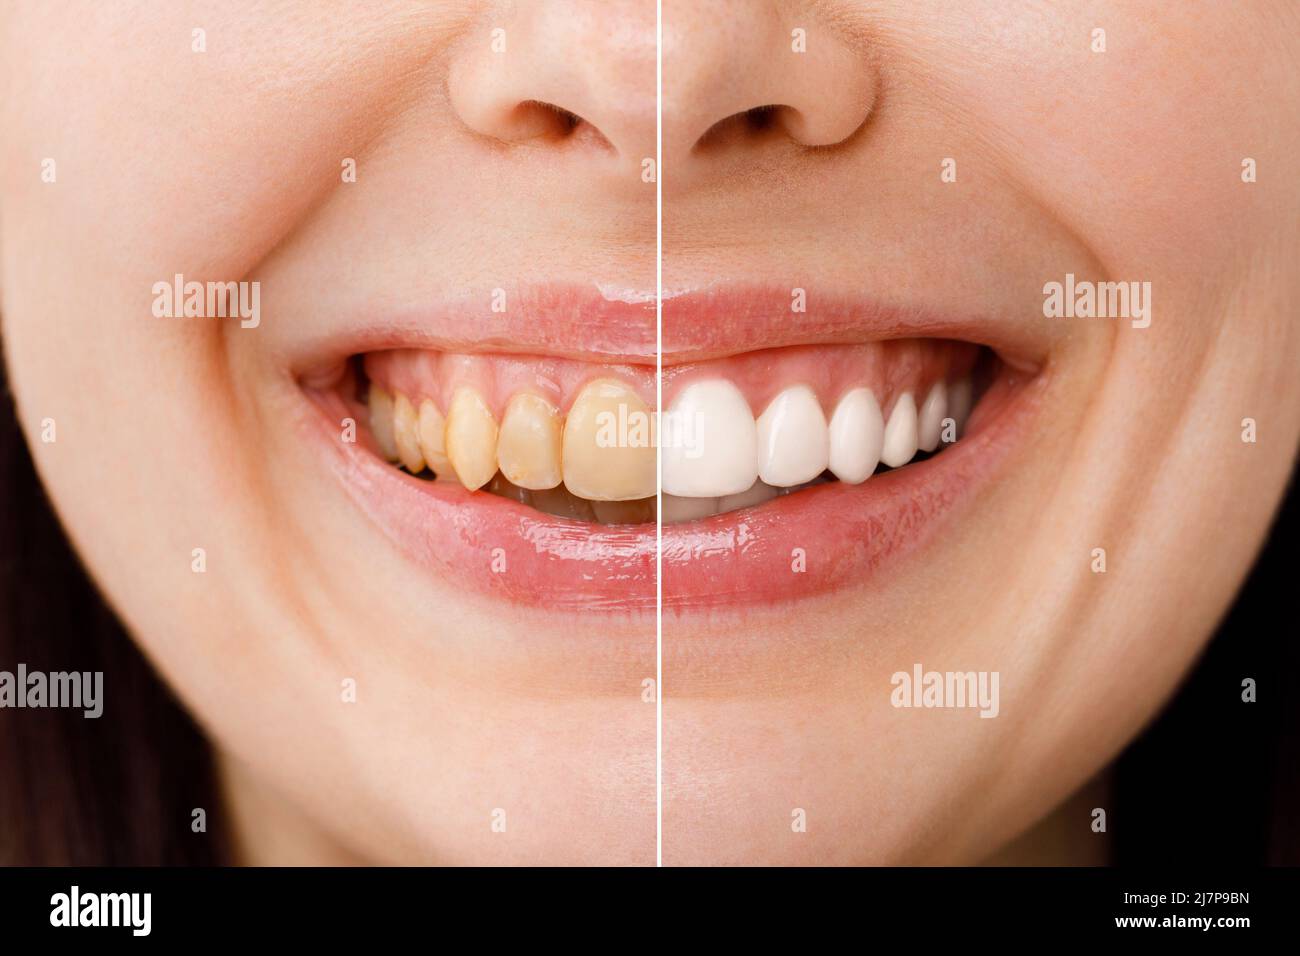 woman teeth before and after whitening. Over white background. Dental clinic patient. Image symbolizes oral care dentistry, stomatology. Stock Photo